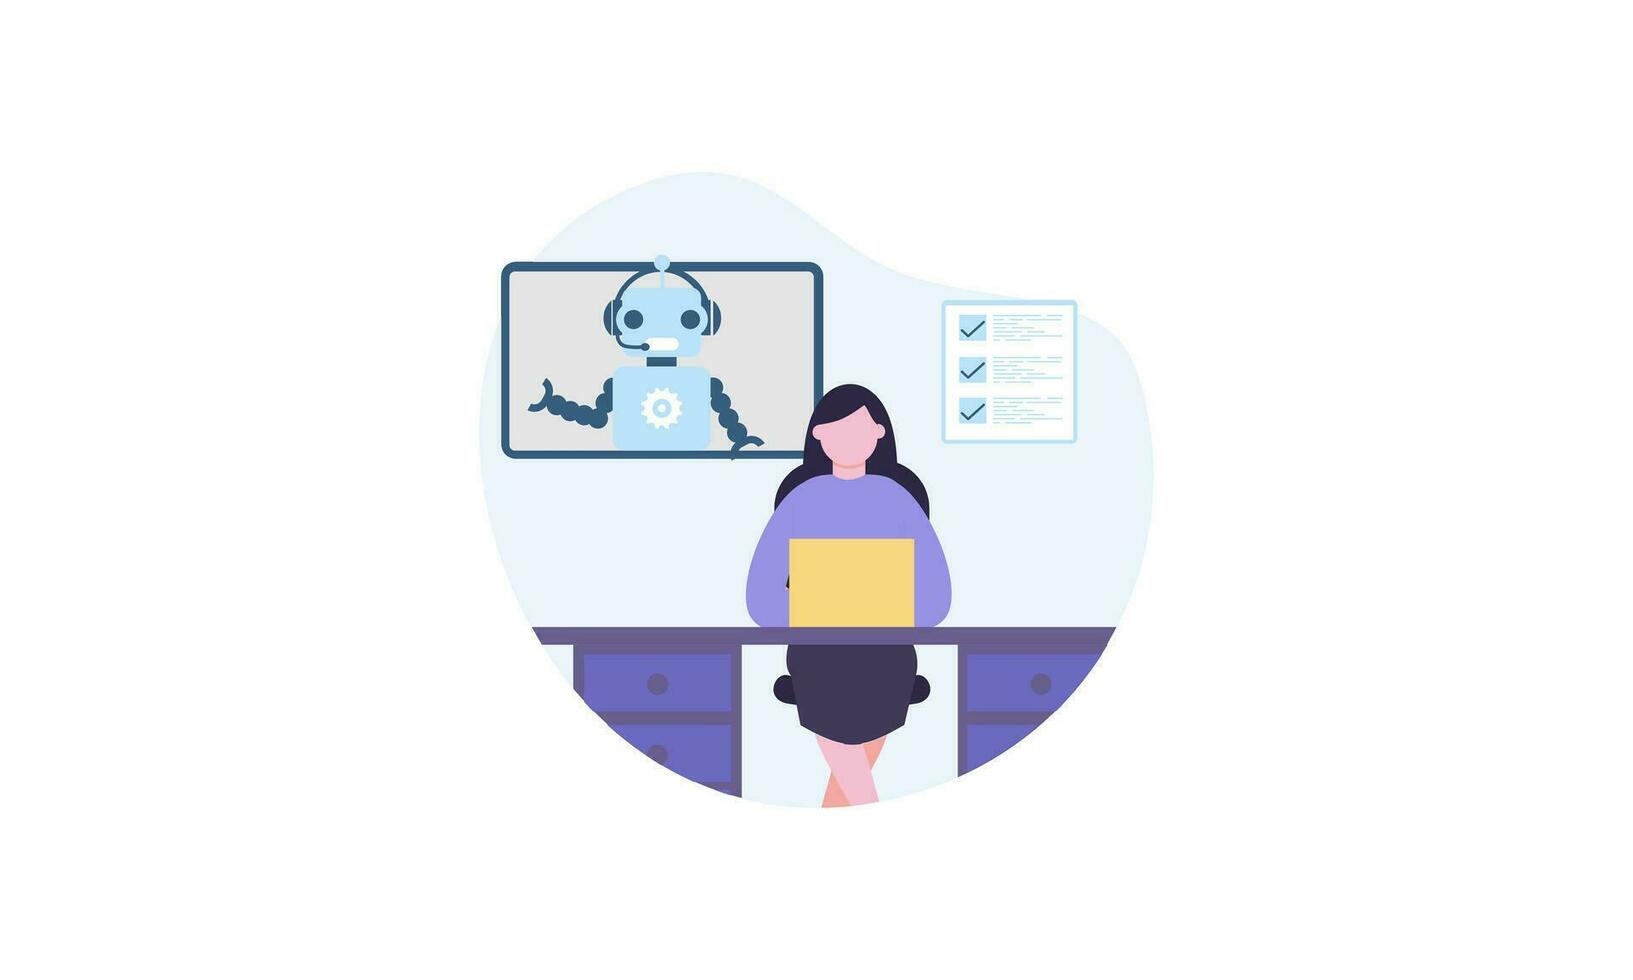 Generative AI robot work in office with people illustration vector